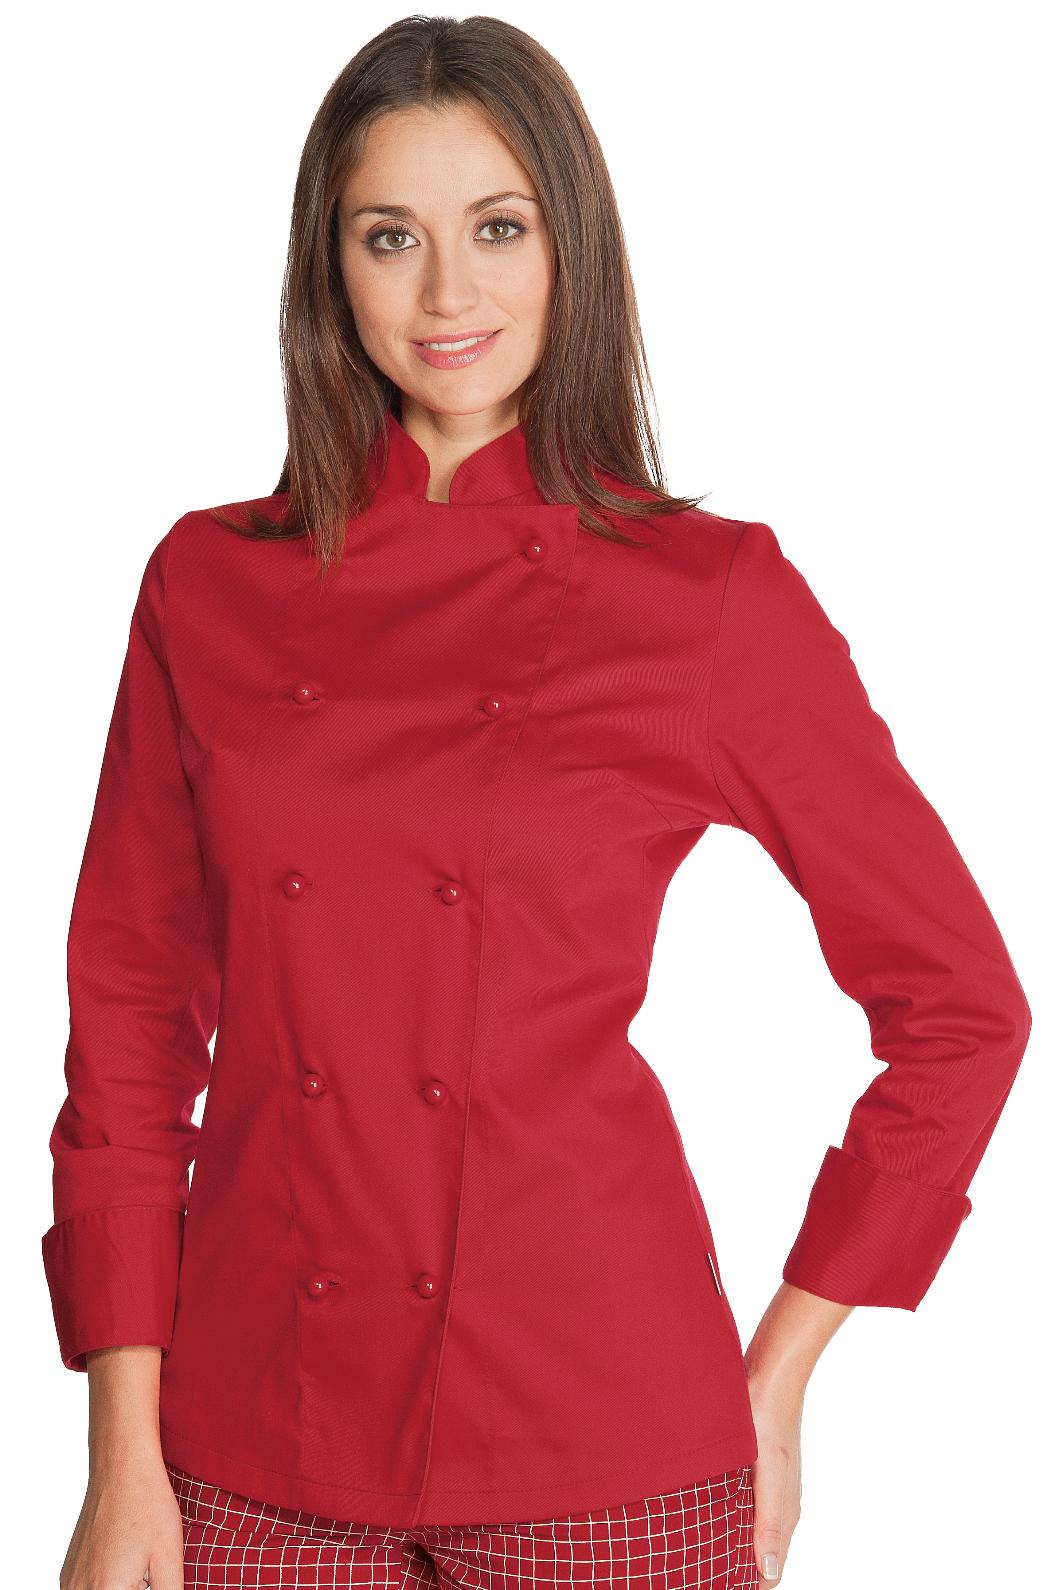 057507 - GIACCA LADY CHEF ROSSO